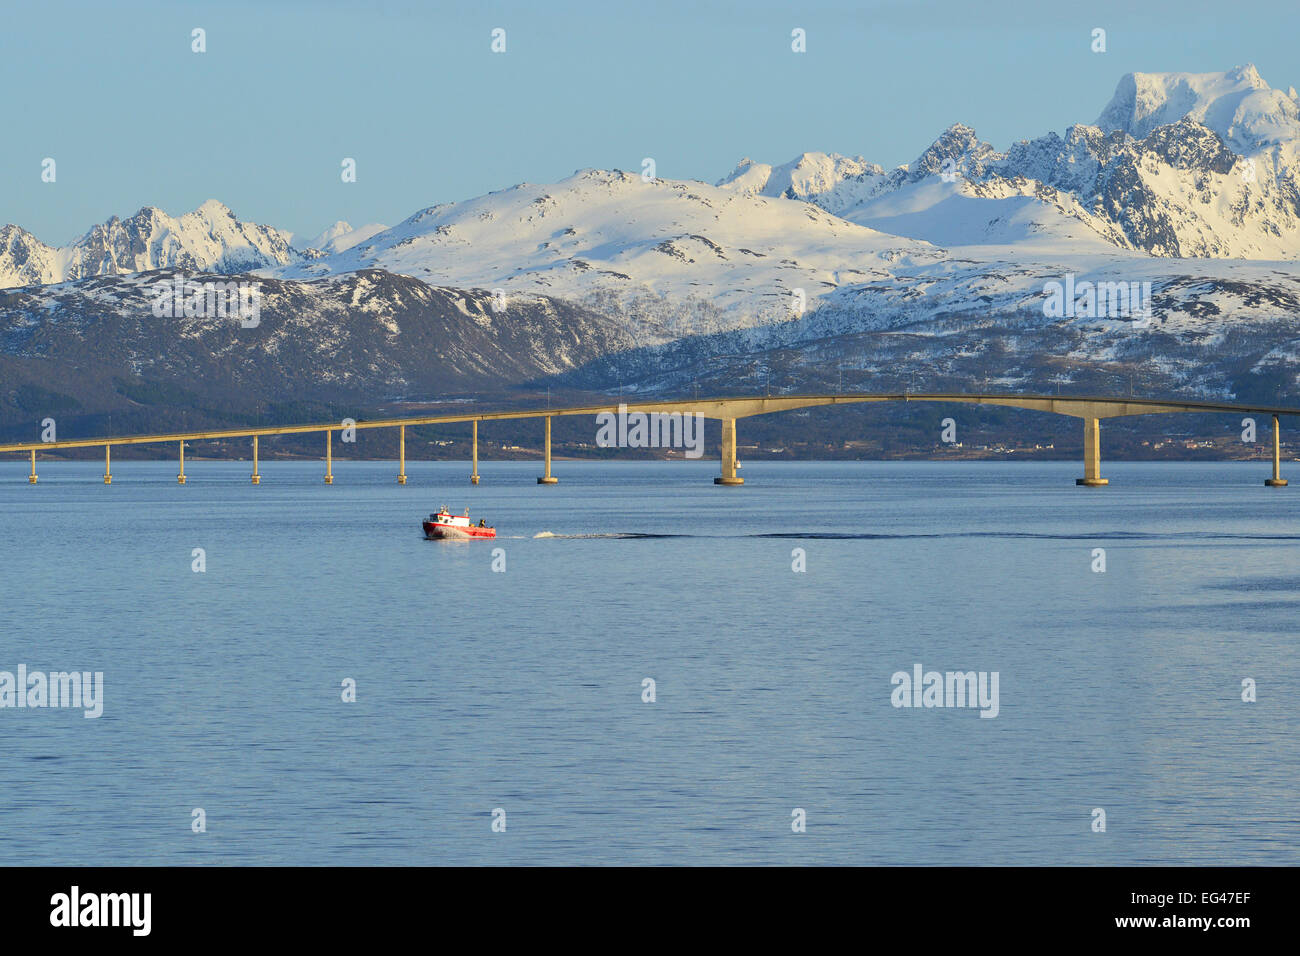 Red boat in front of HadseRM Bridge across the strait, at the back the snow-capped mountains of Hinnøya isRMand, RMangøysund Stock Photo